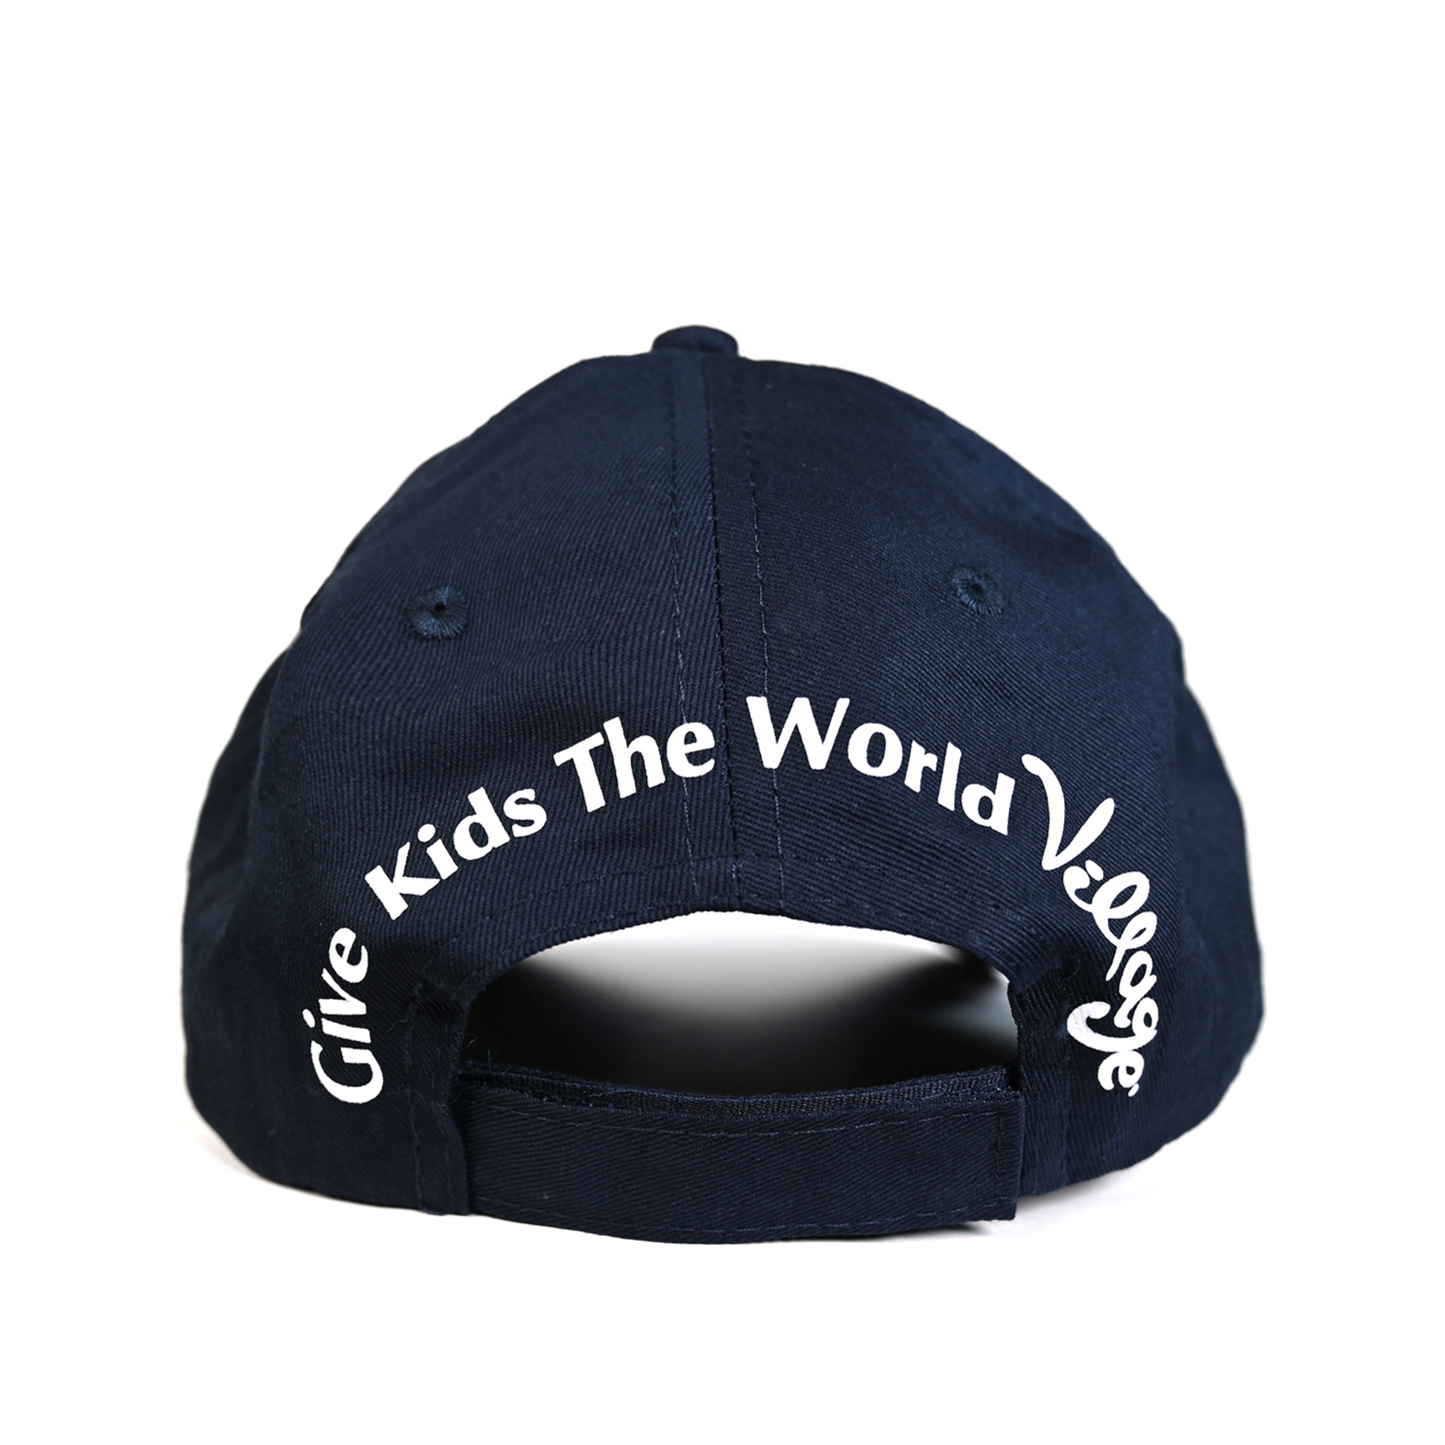 Youth Star Hat